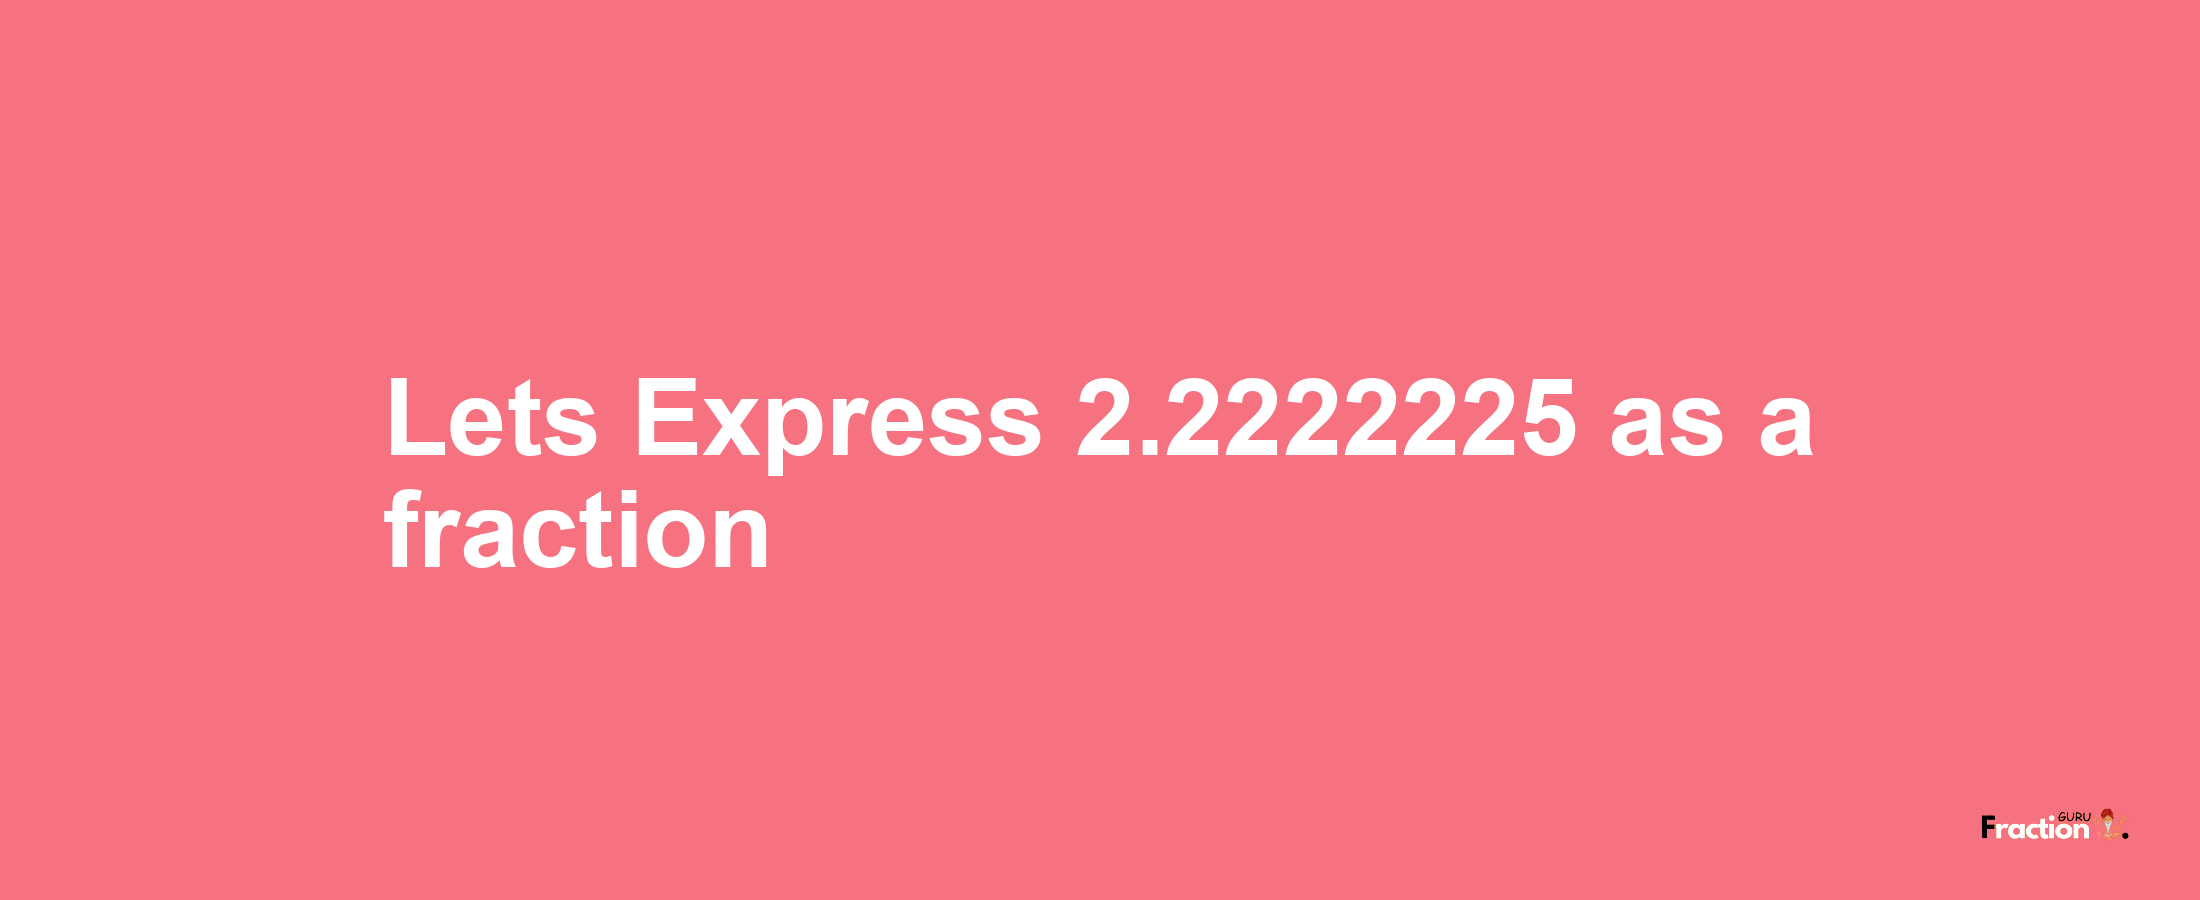 Lets Express 2.2222225 as afraction